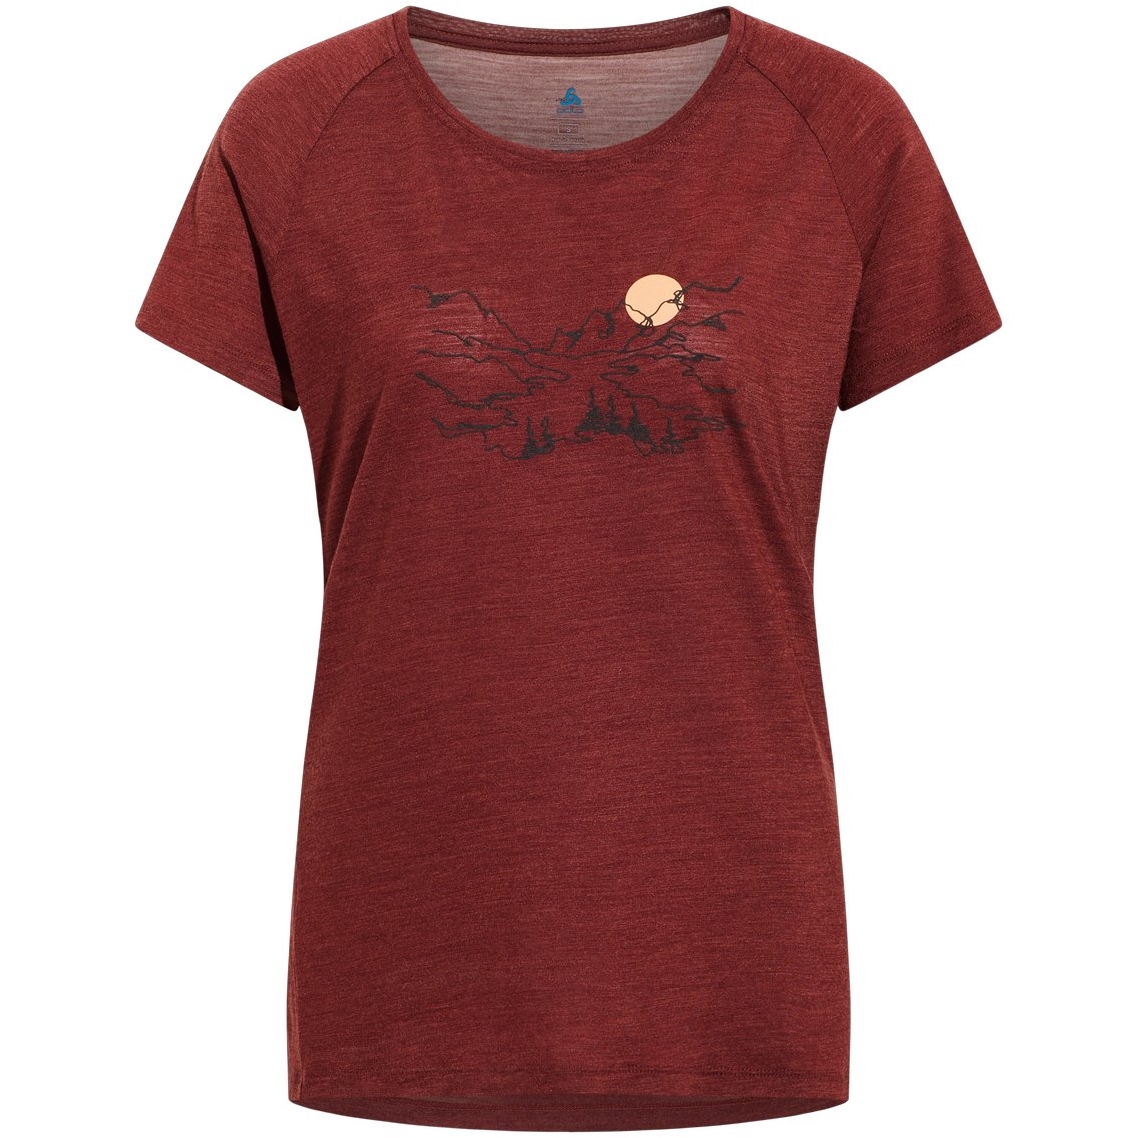 Picture of Odlo Ascent Performance Wool 130 Valley T-Shirt Women - spiced apple melange